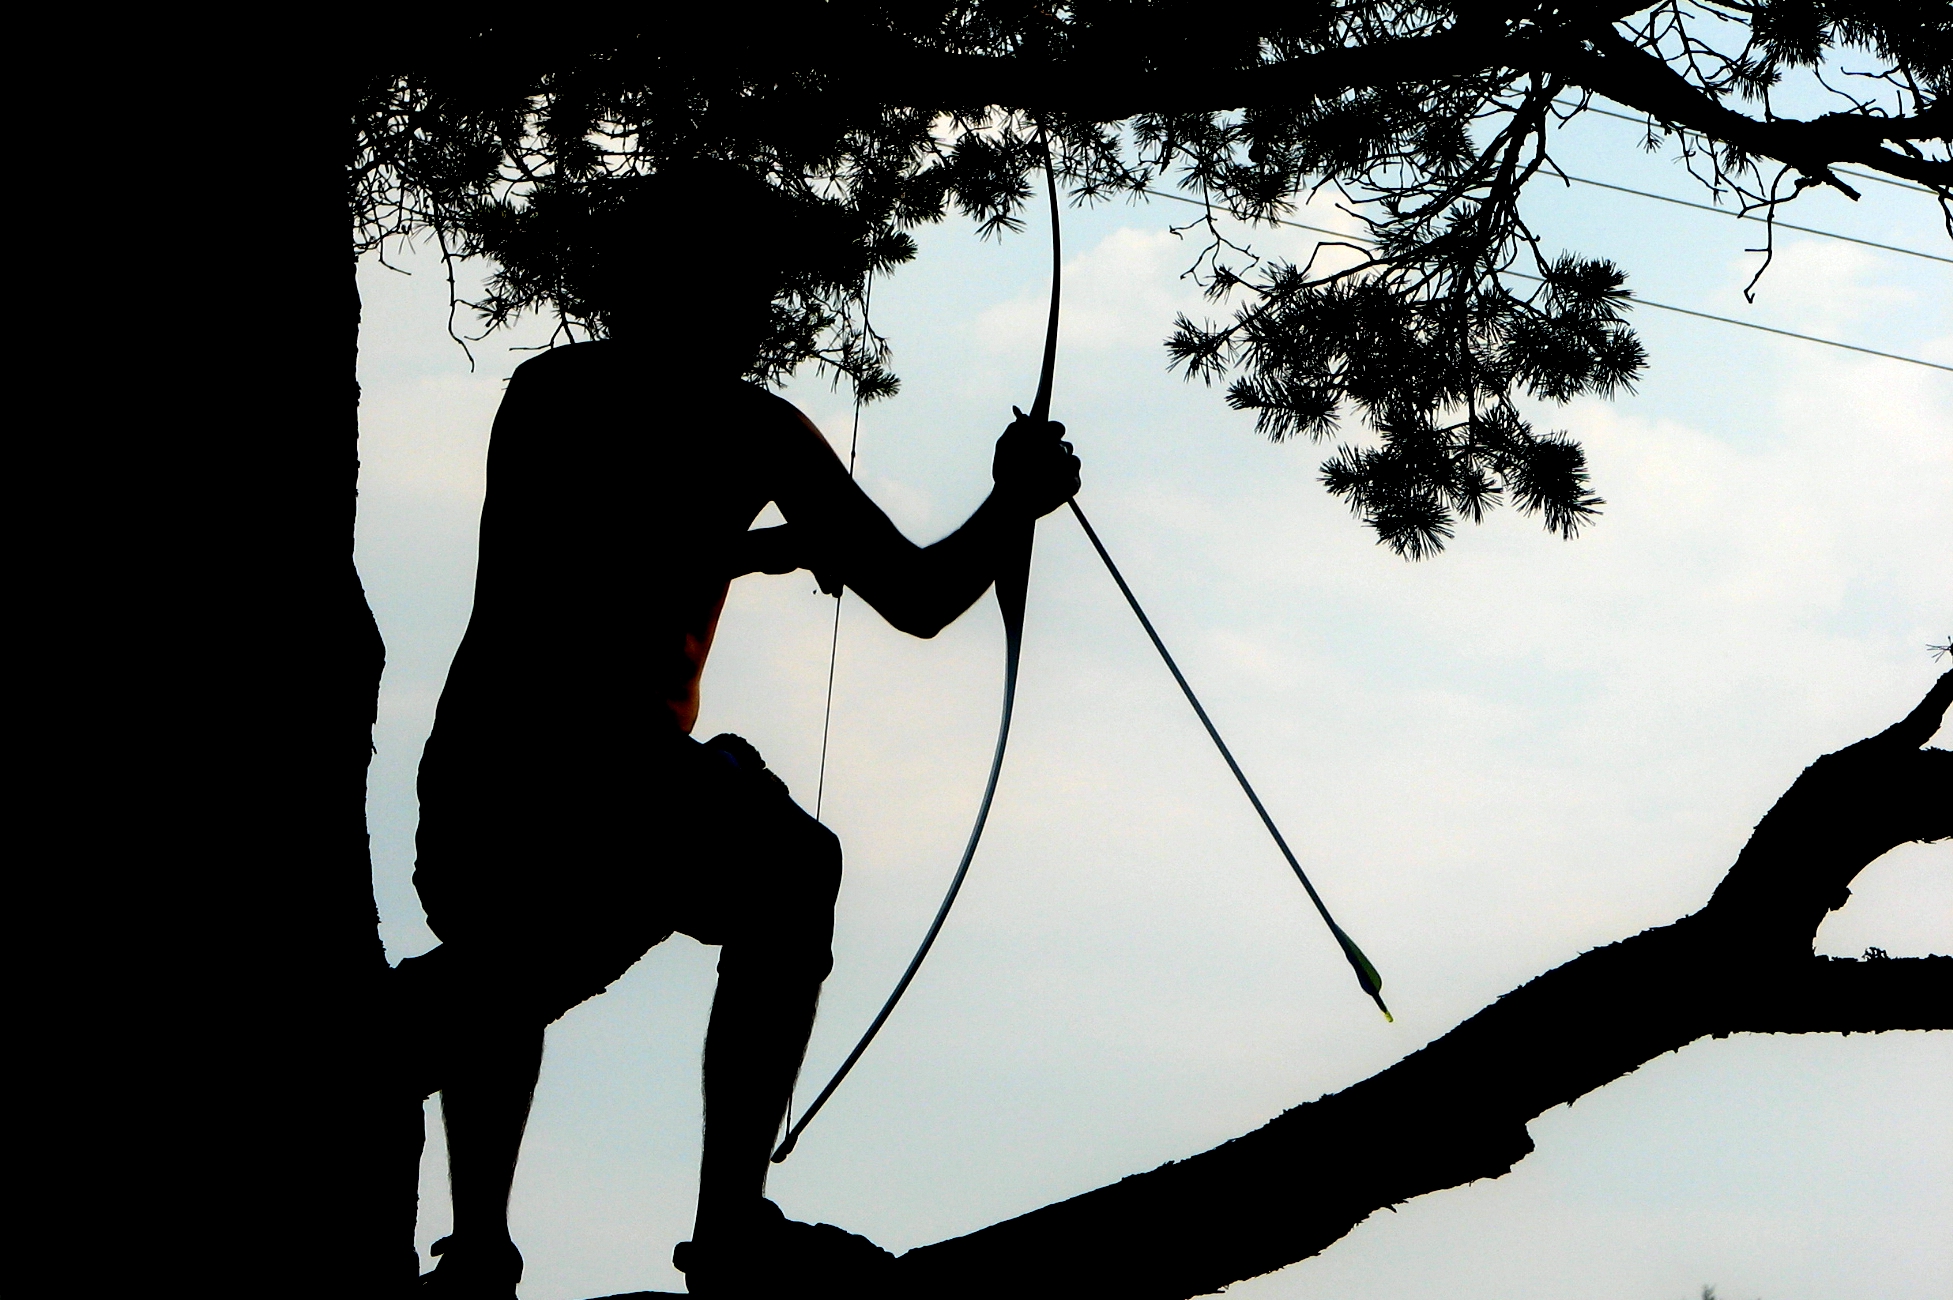 a person in the shadow climbing on a limb with wires